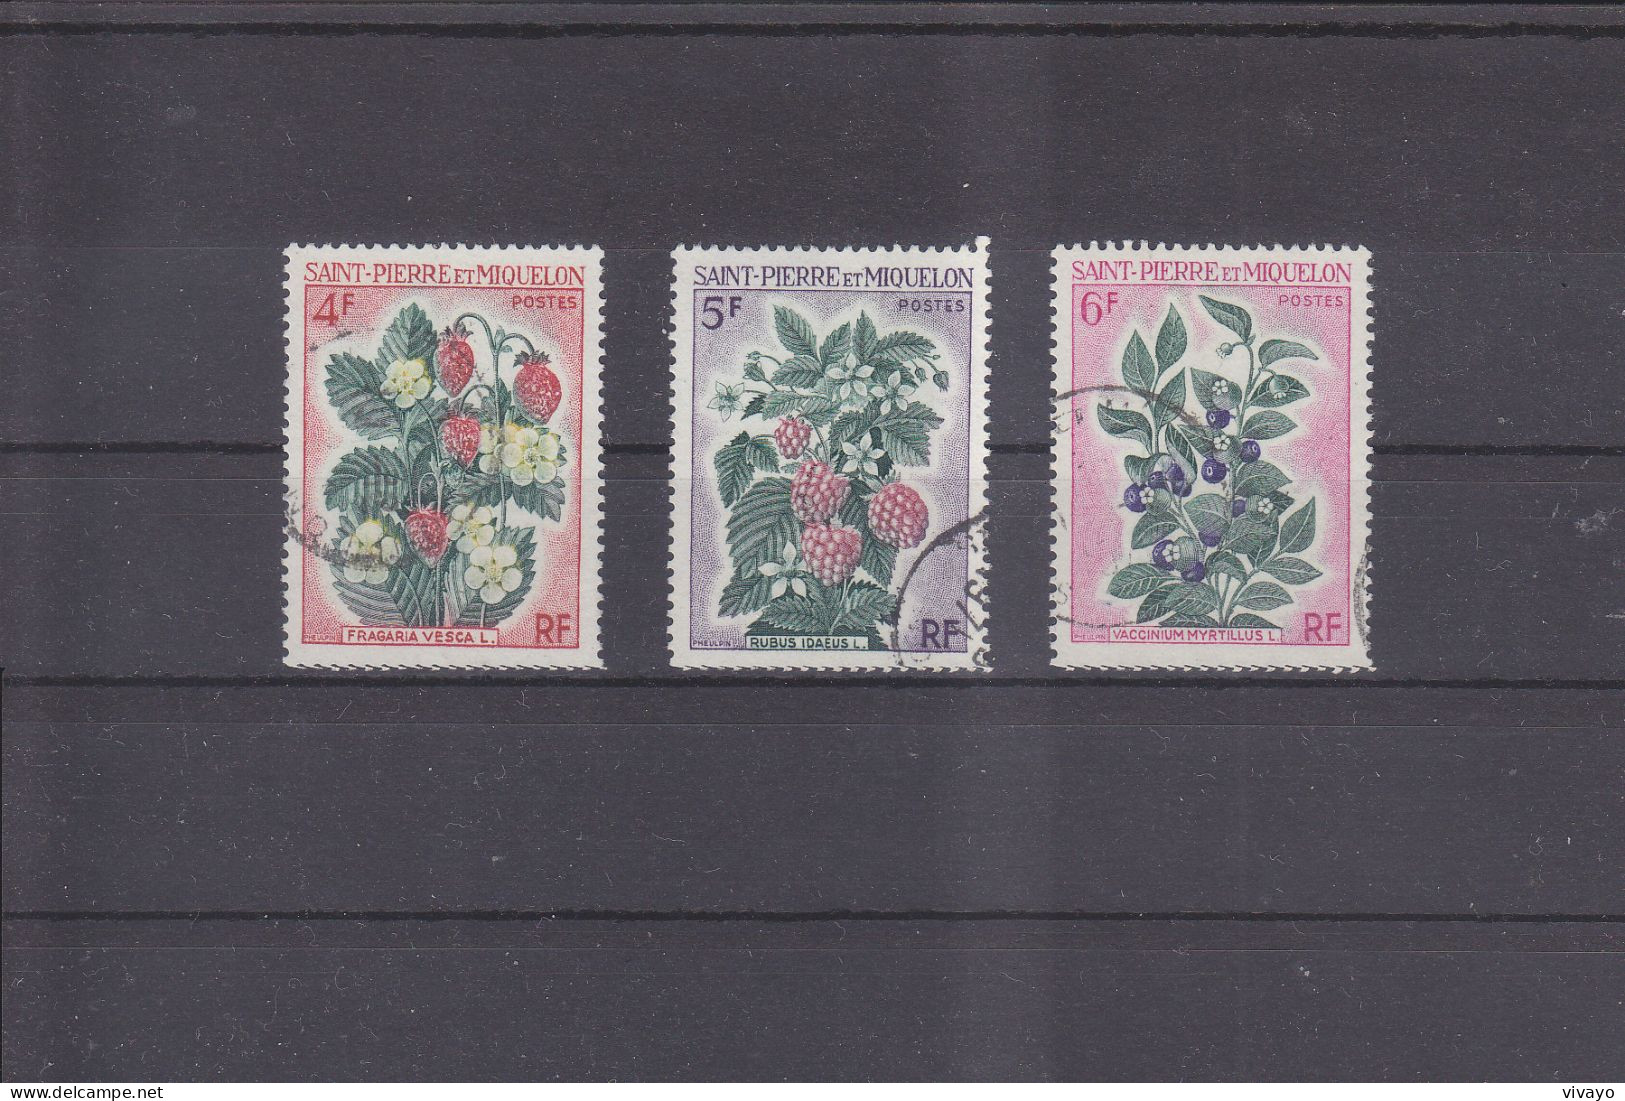 ST. PIERRE & MIQUELON - O / FINE CANCELLED - 1970 - FLOWERS & FRUITS - Yv. 402/4   Mi. 456/8 - Used Stamps